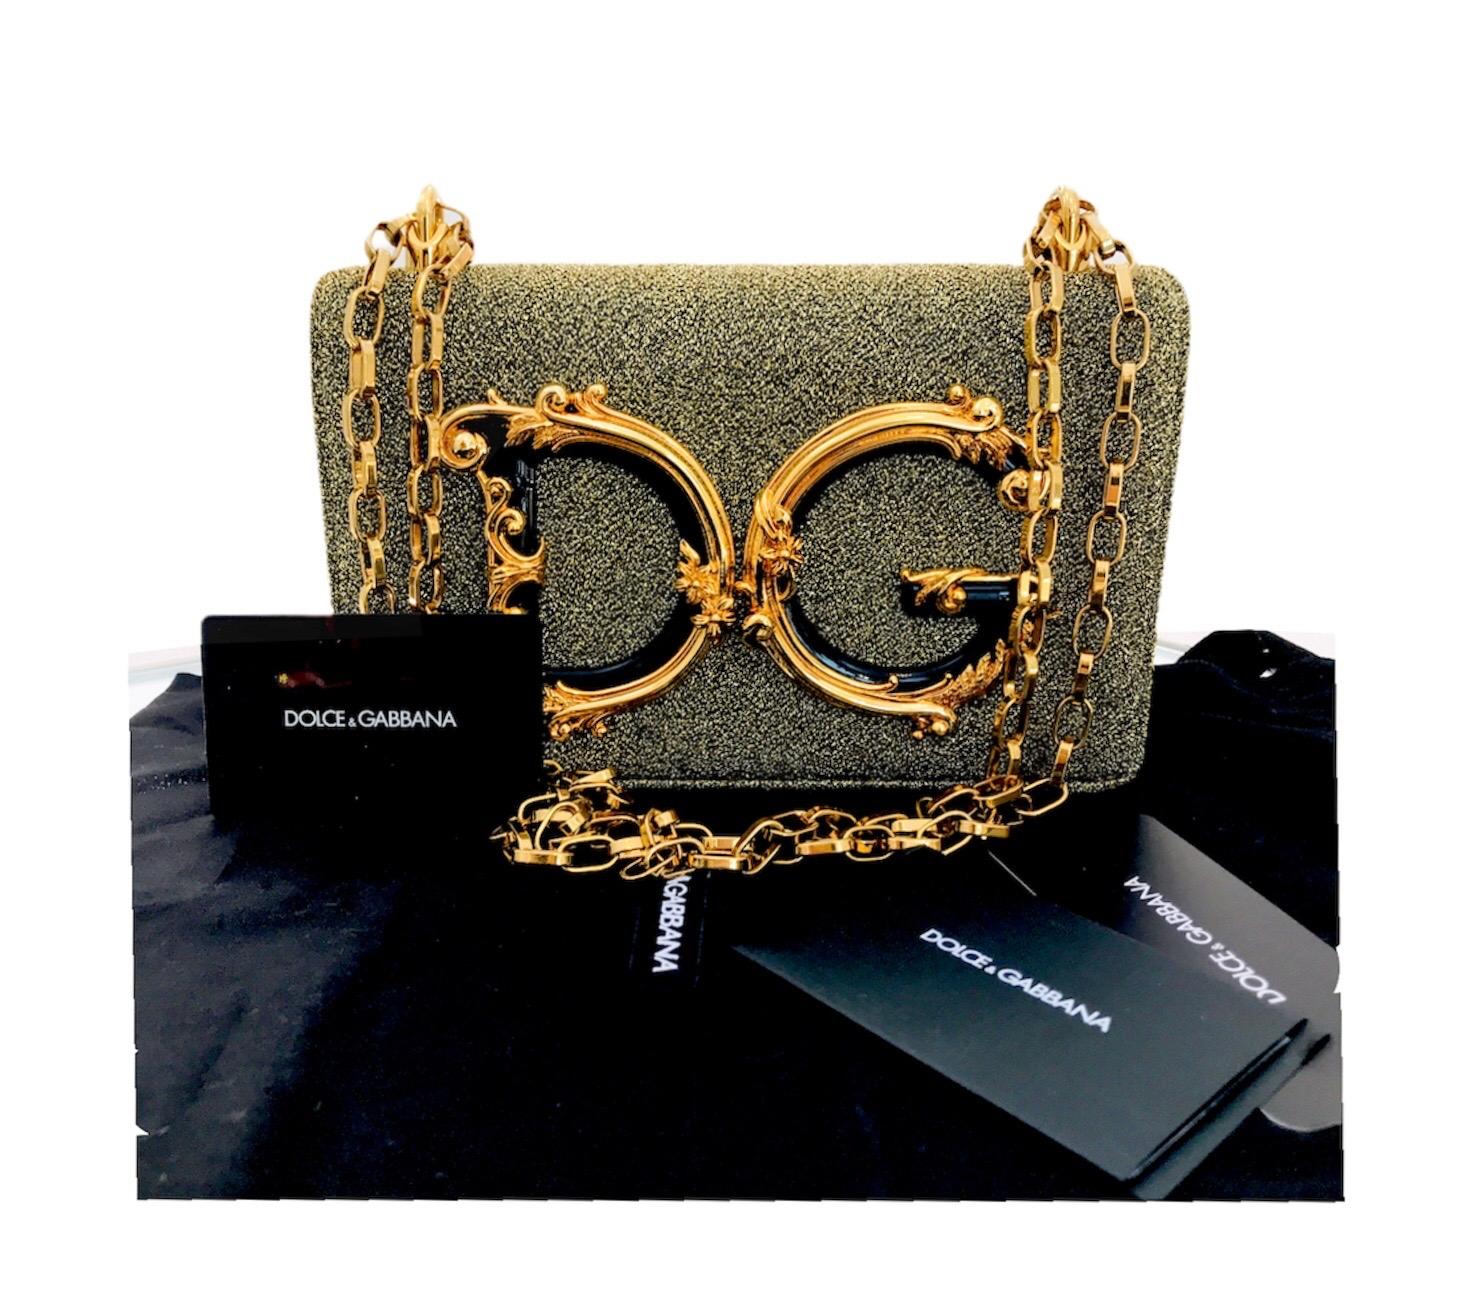 This metallic Dolce & Gabbana baroque logo detail shoulder bag is sumptuously sculpted in Italy from 100% Nappa leather in a shoulder bag design. It features a thick gold-tone chain shoulder strap, a flap front closure with magnetic clasp fastening,